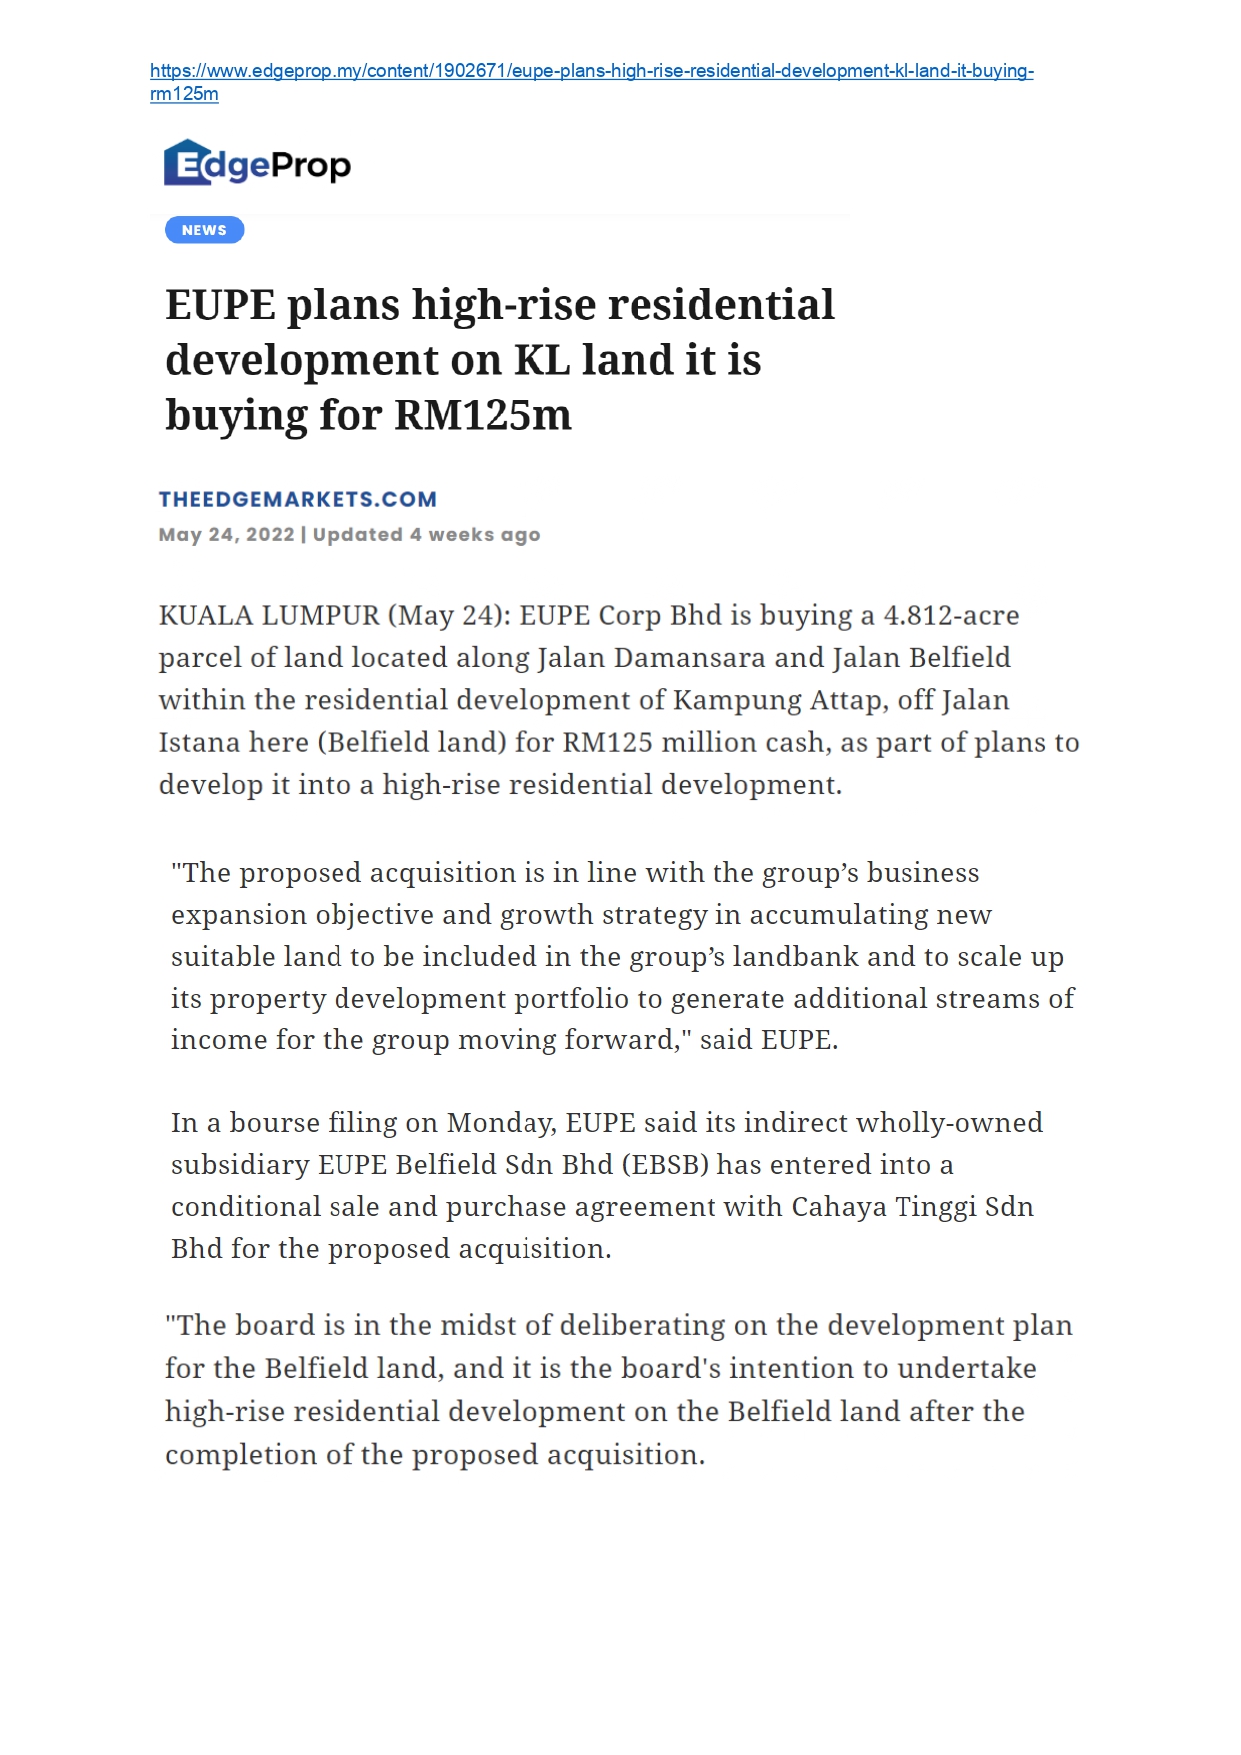 EdgeProp and NST : Proposed Acquisition in KL for High-Rise Development